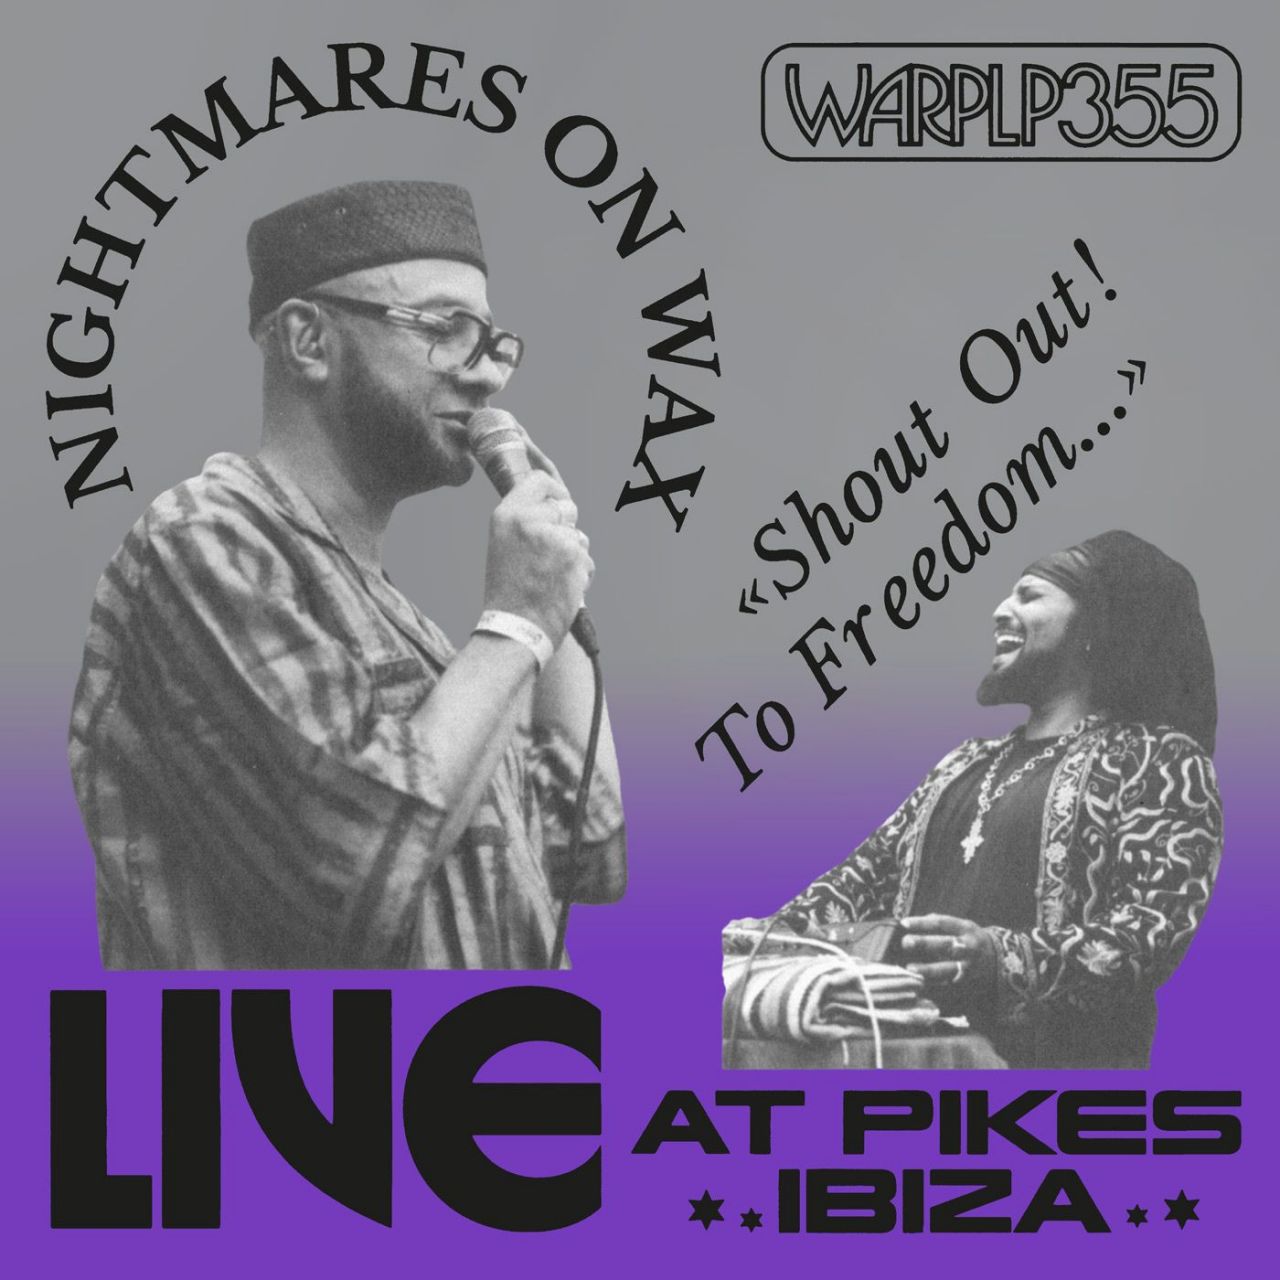 Nightmares On Wax - Shout Out! To Freedom? (Live at Pikes Ibiza) - LP